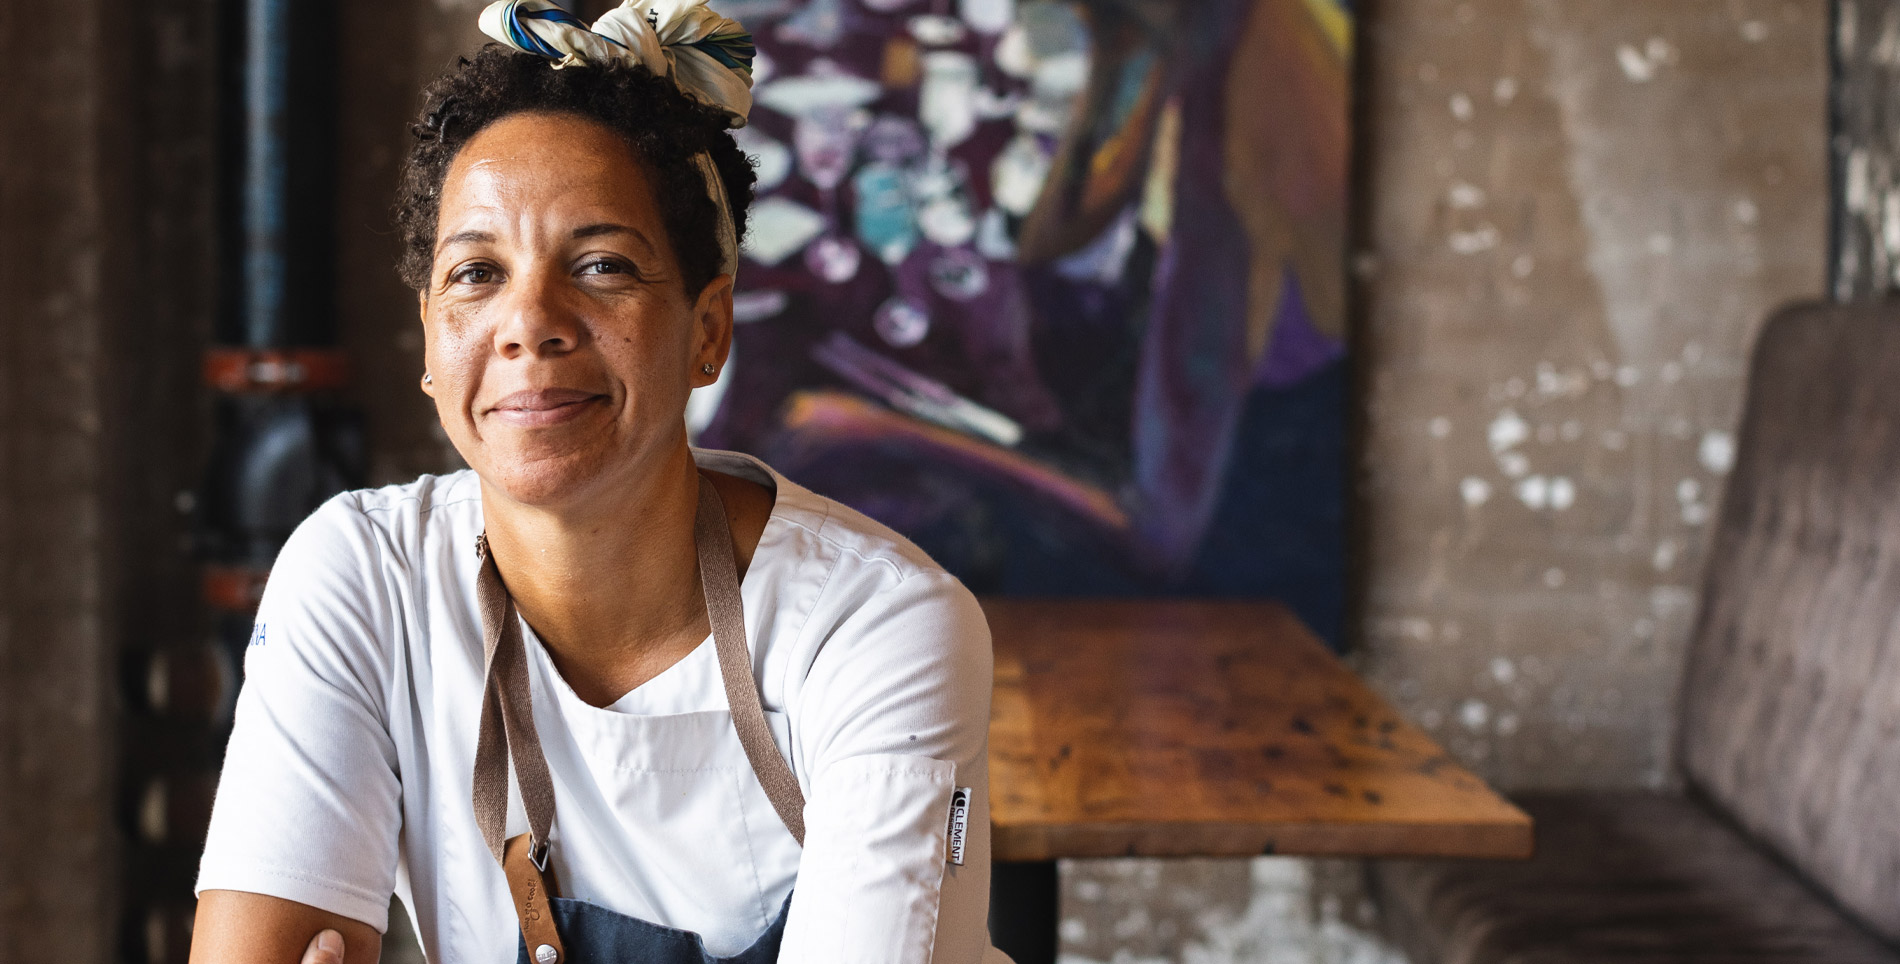 Chef Nina Compton on Building a Home and Legacy in New Orleans